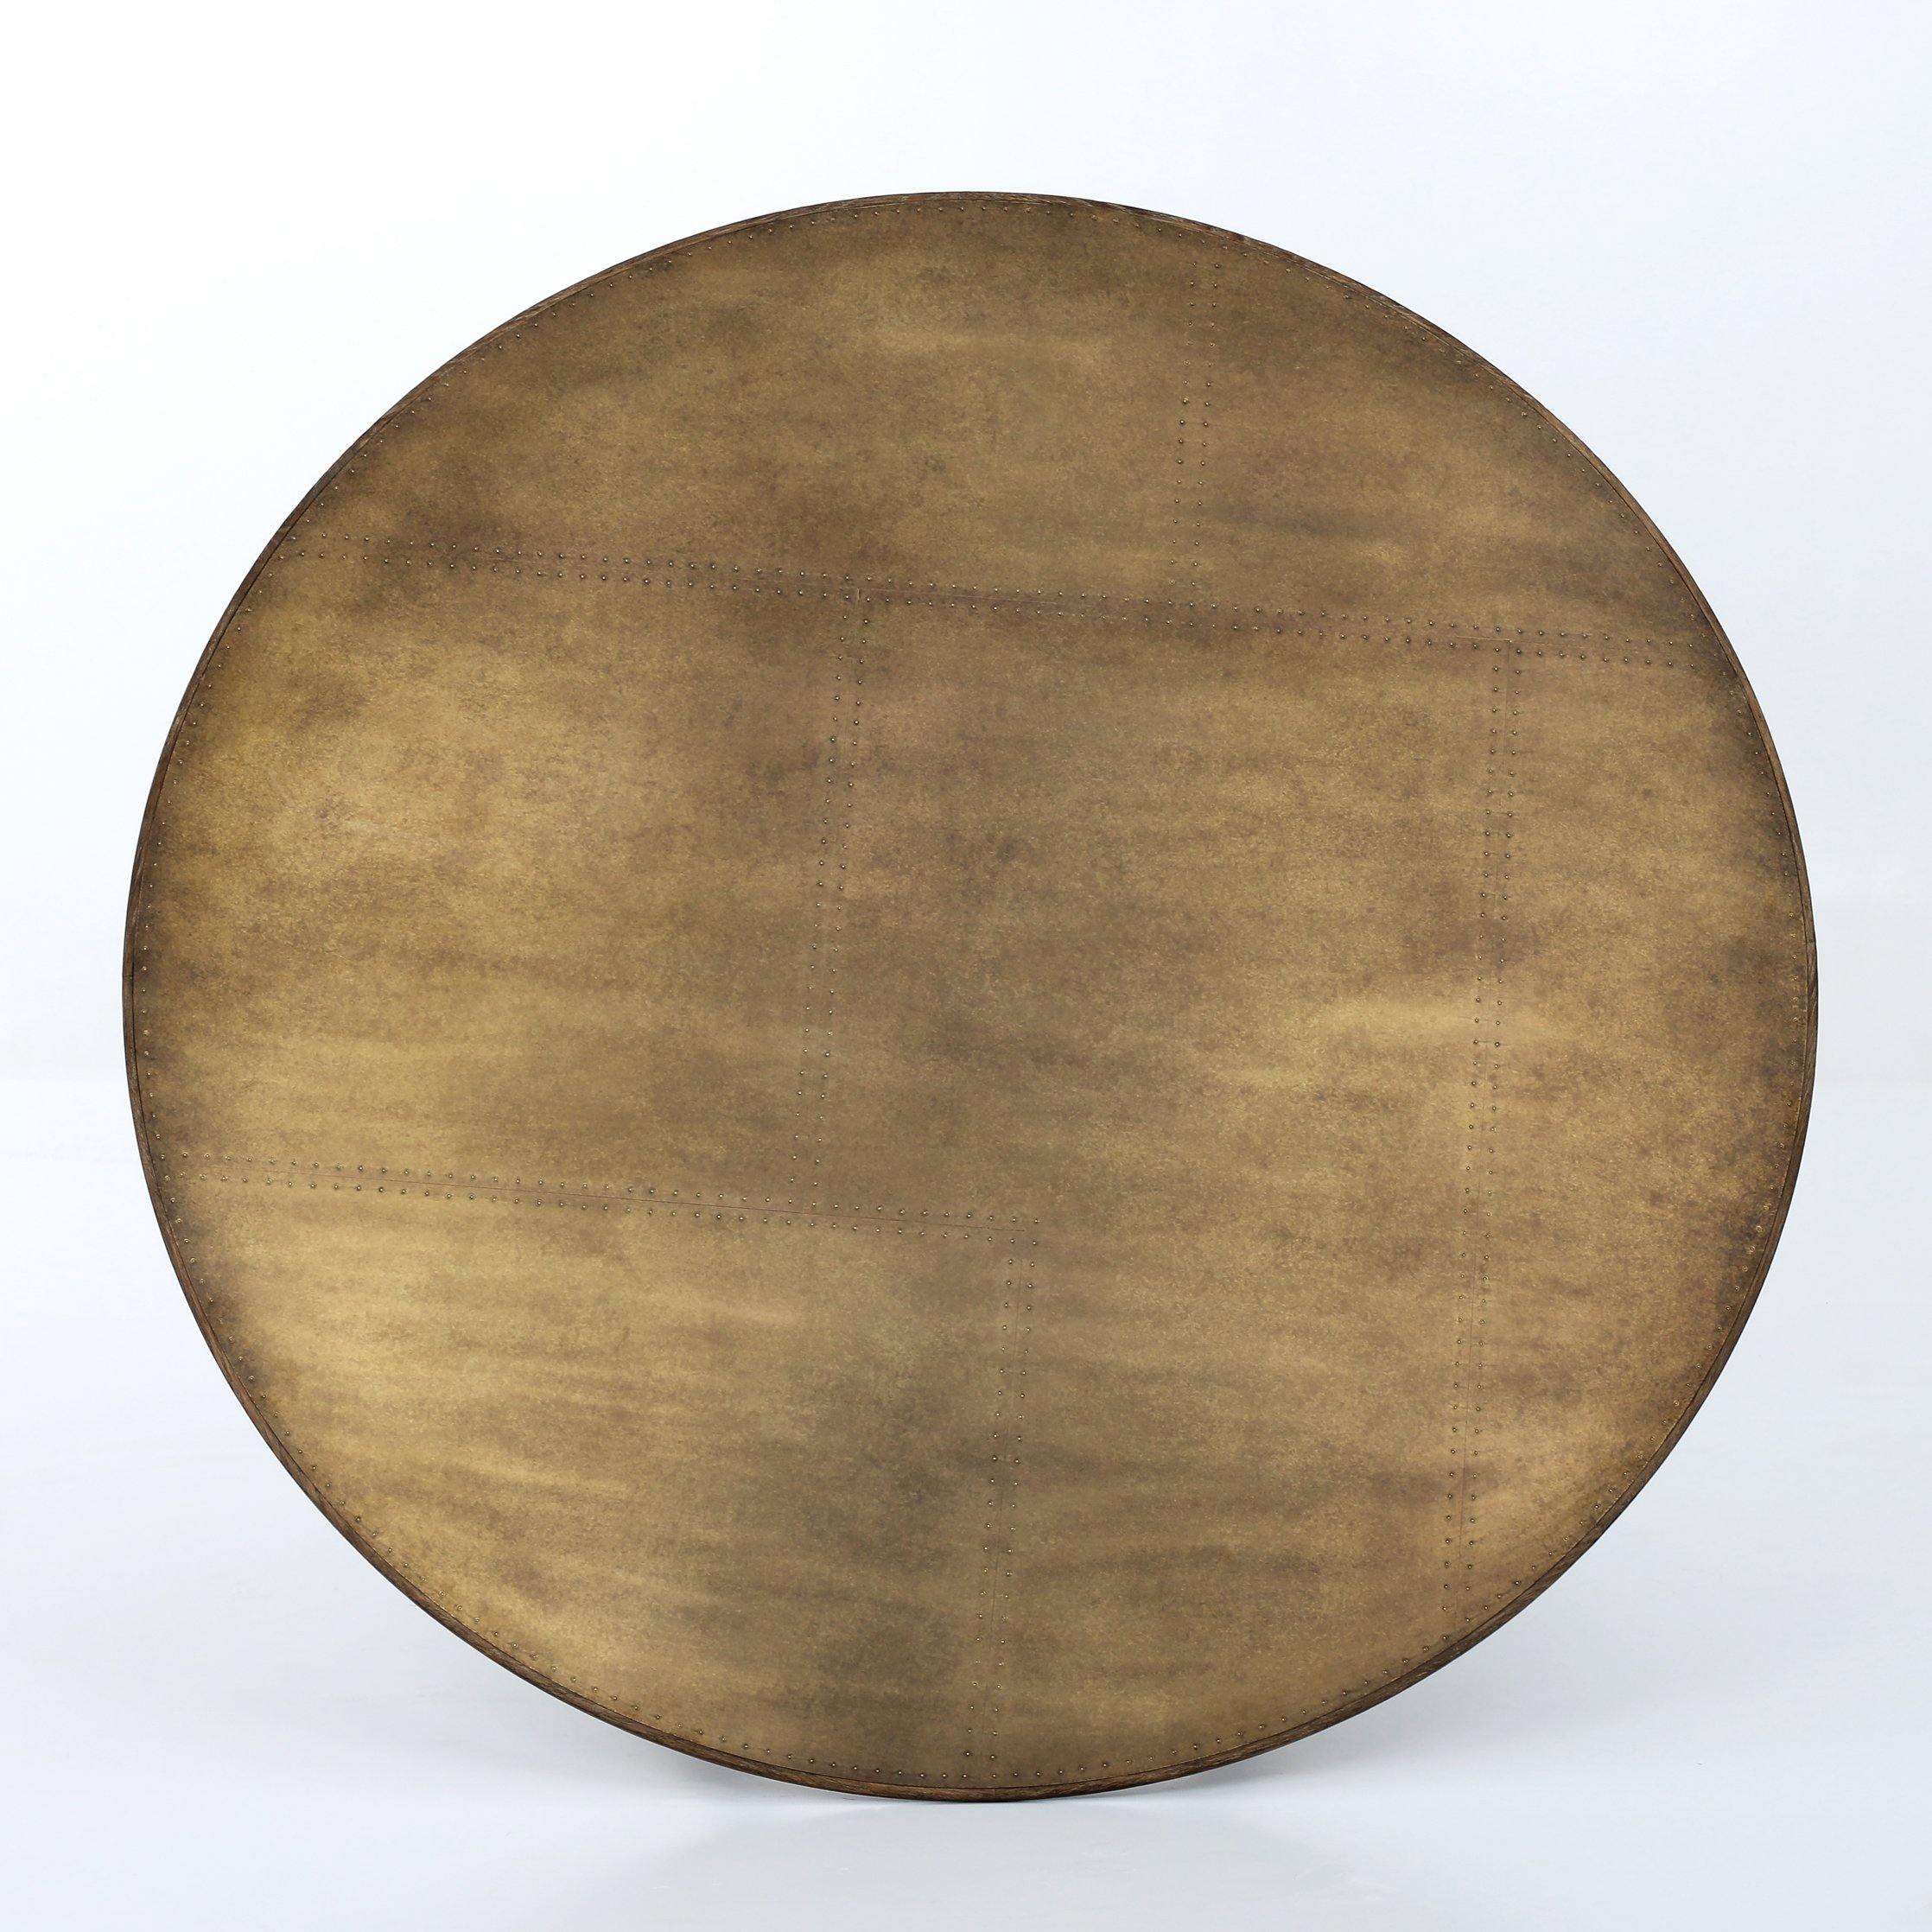 Spider Round Dining Table - Reimagine Designs - dining table